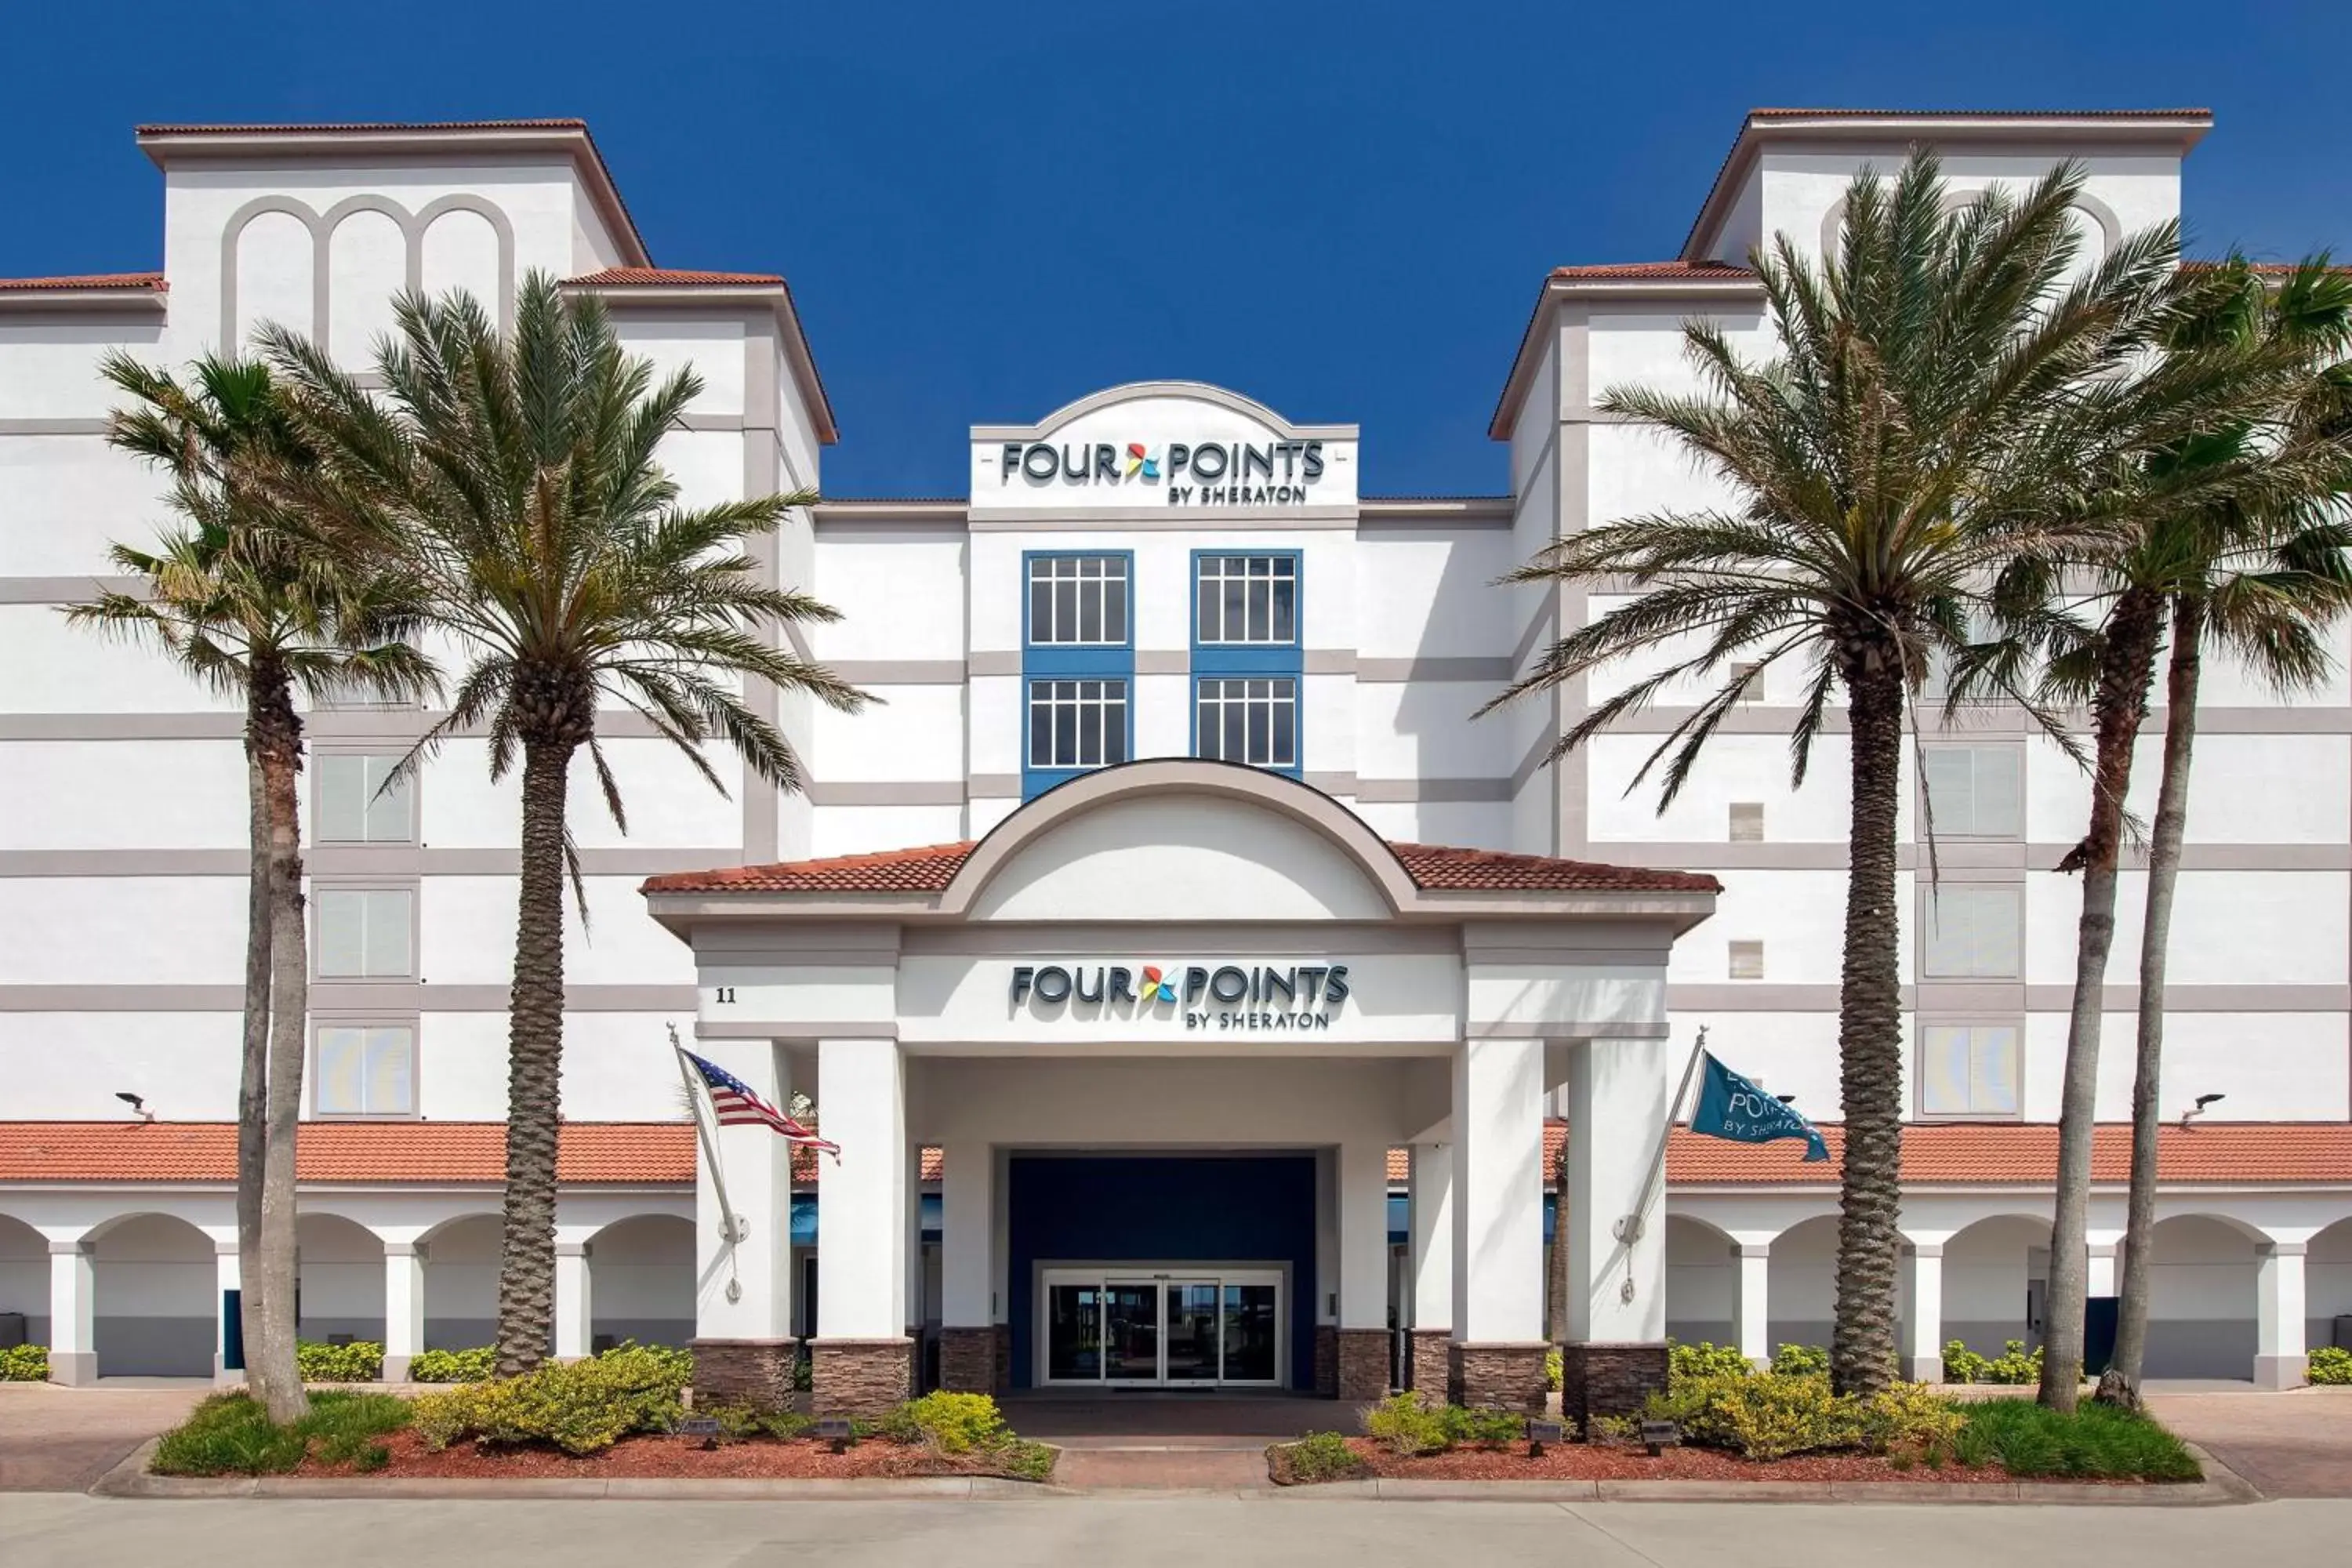 Property Building in Four Points by Sheraton Jacksonville Beachfront